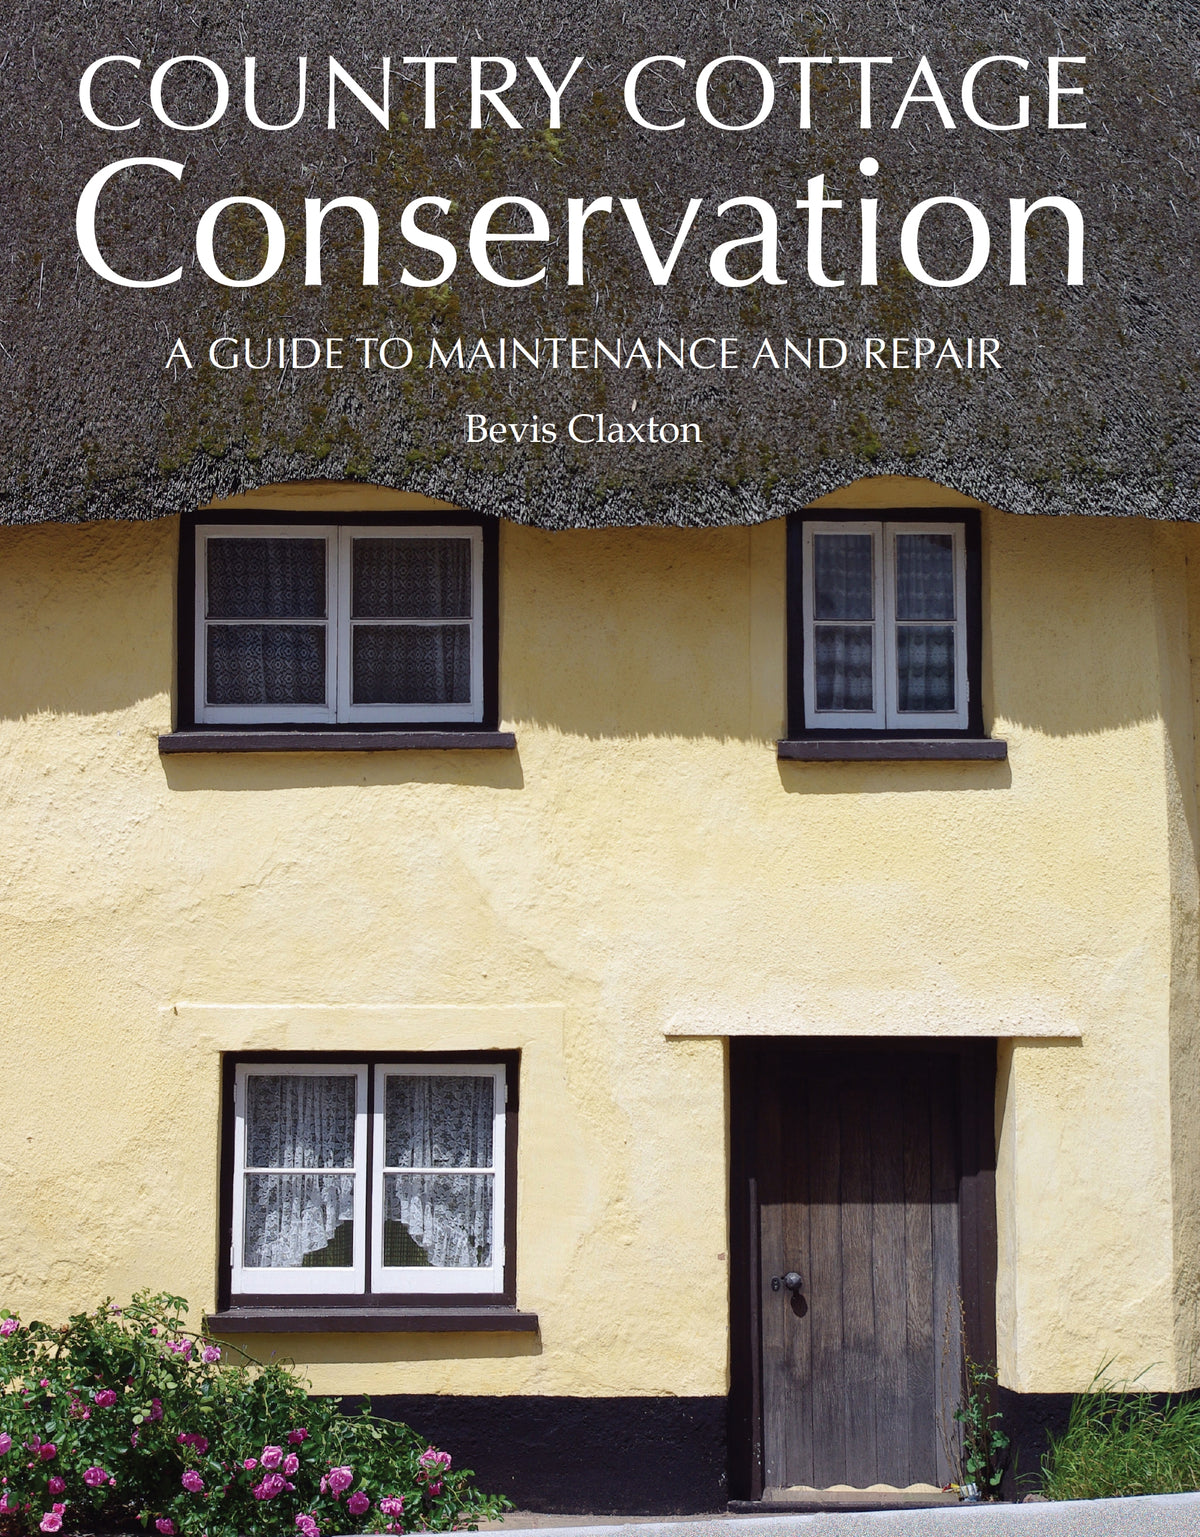 Country Cottage Conservation